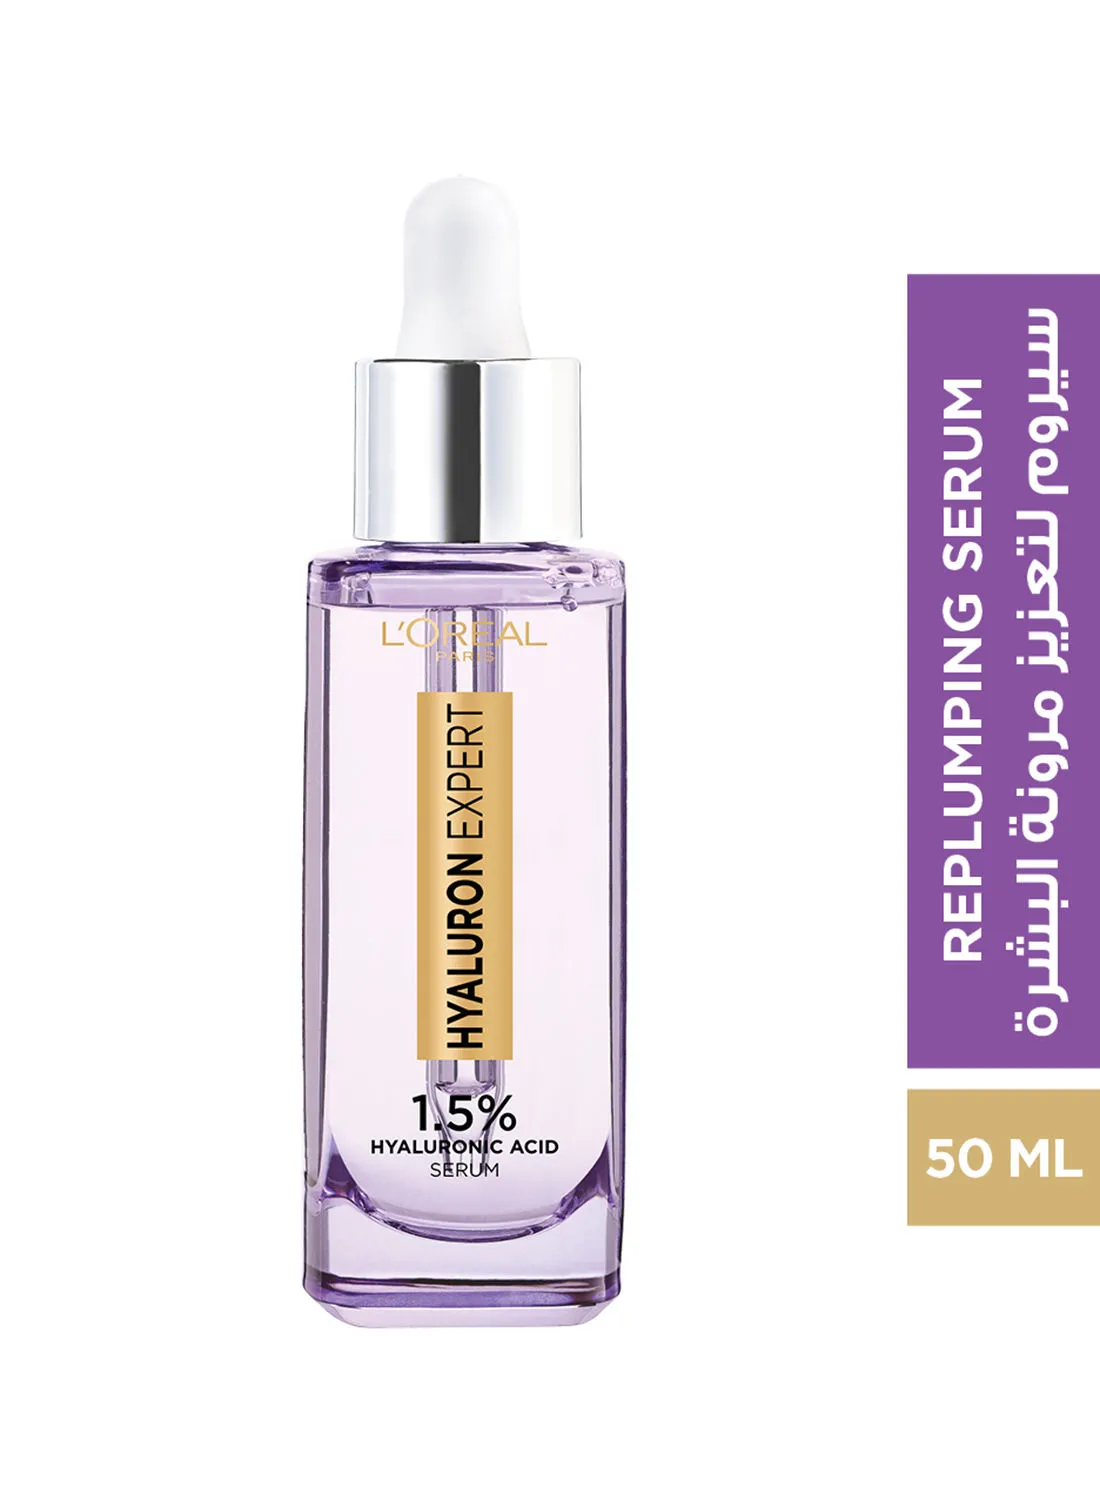 L'OREAL PARIS Hyaluron Expert Replumping Serum With Hyaluronic Acid Clear 50ml